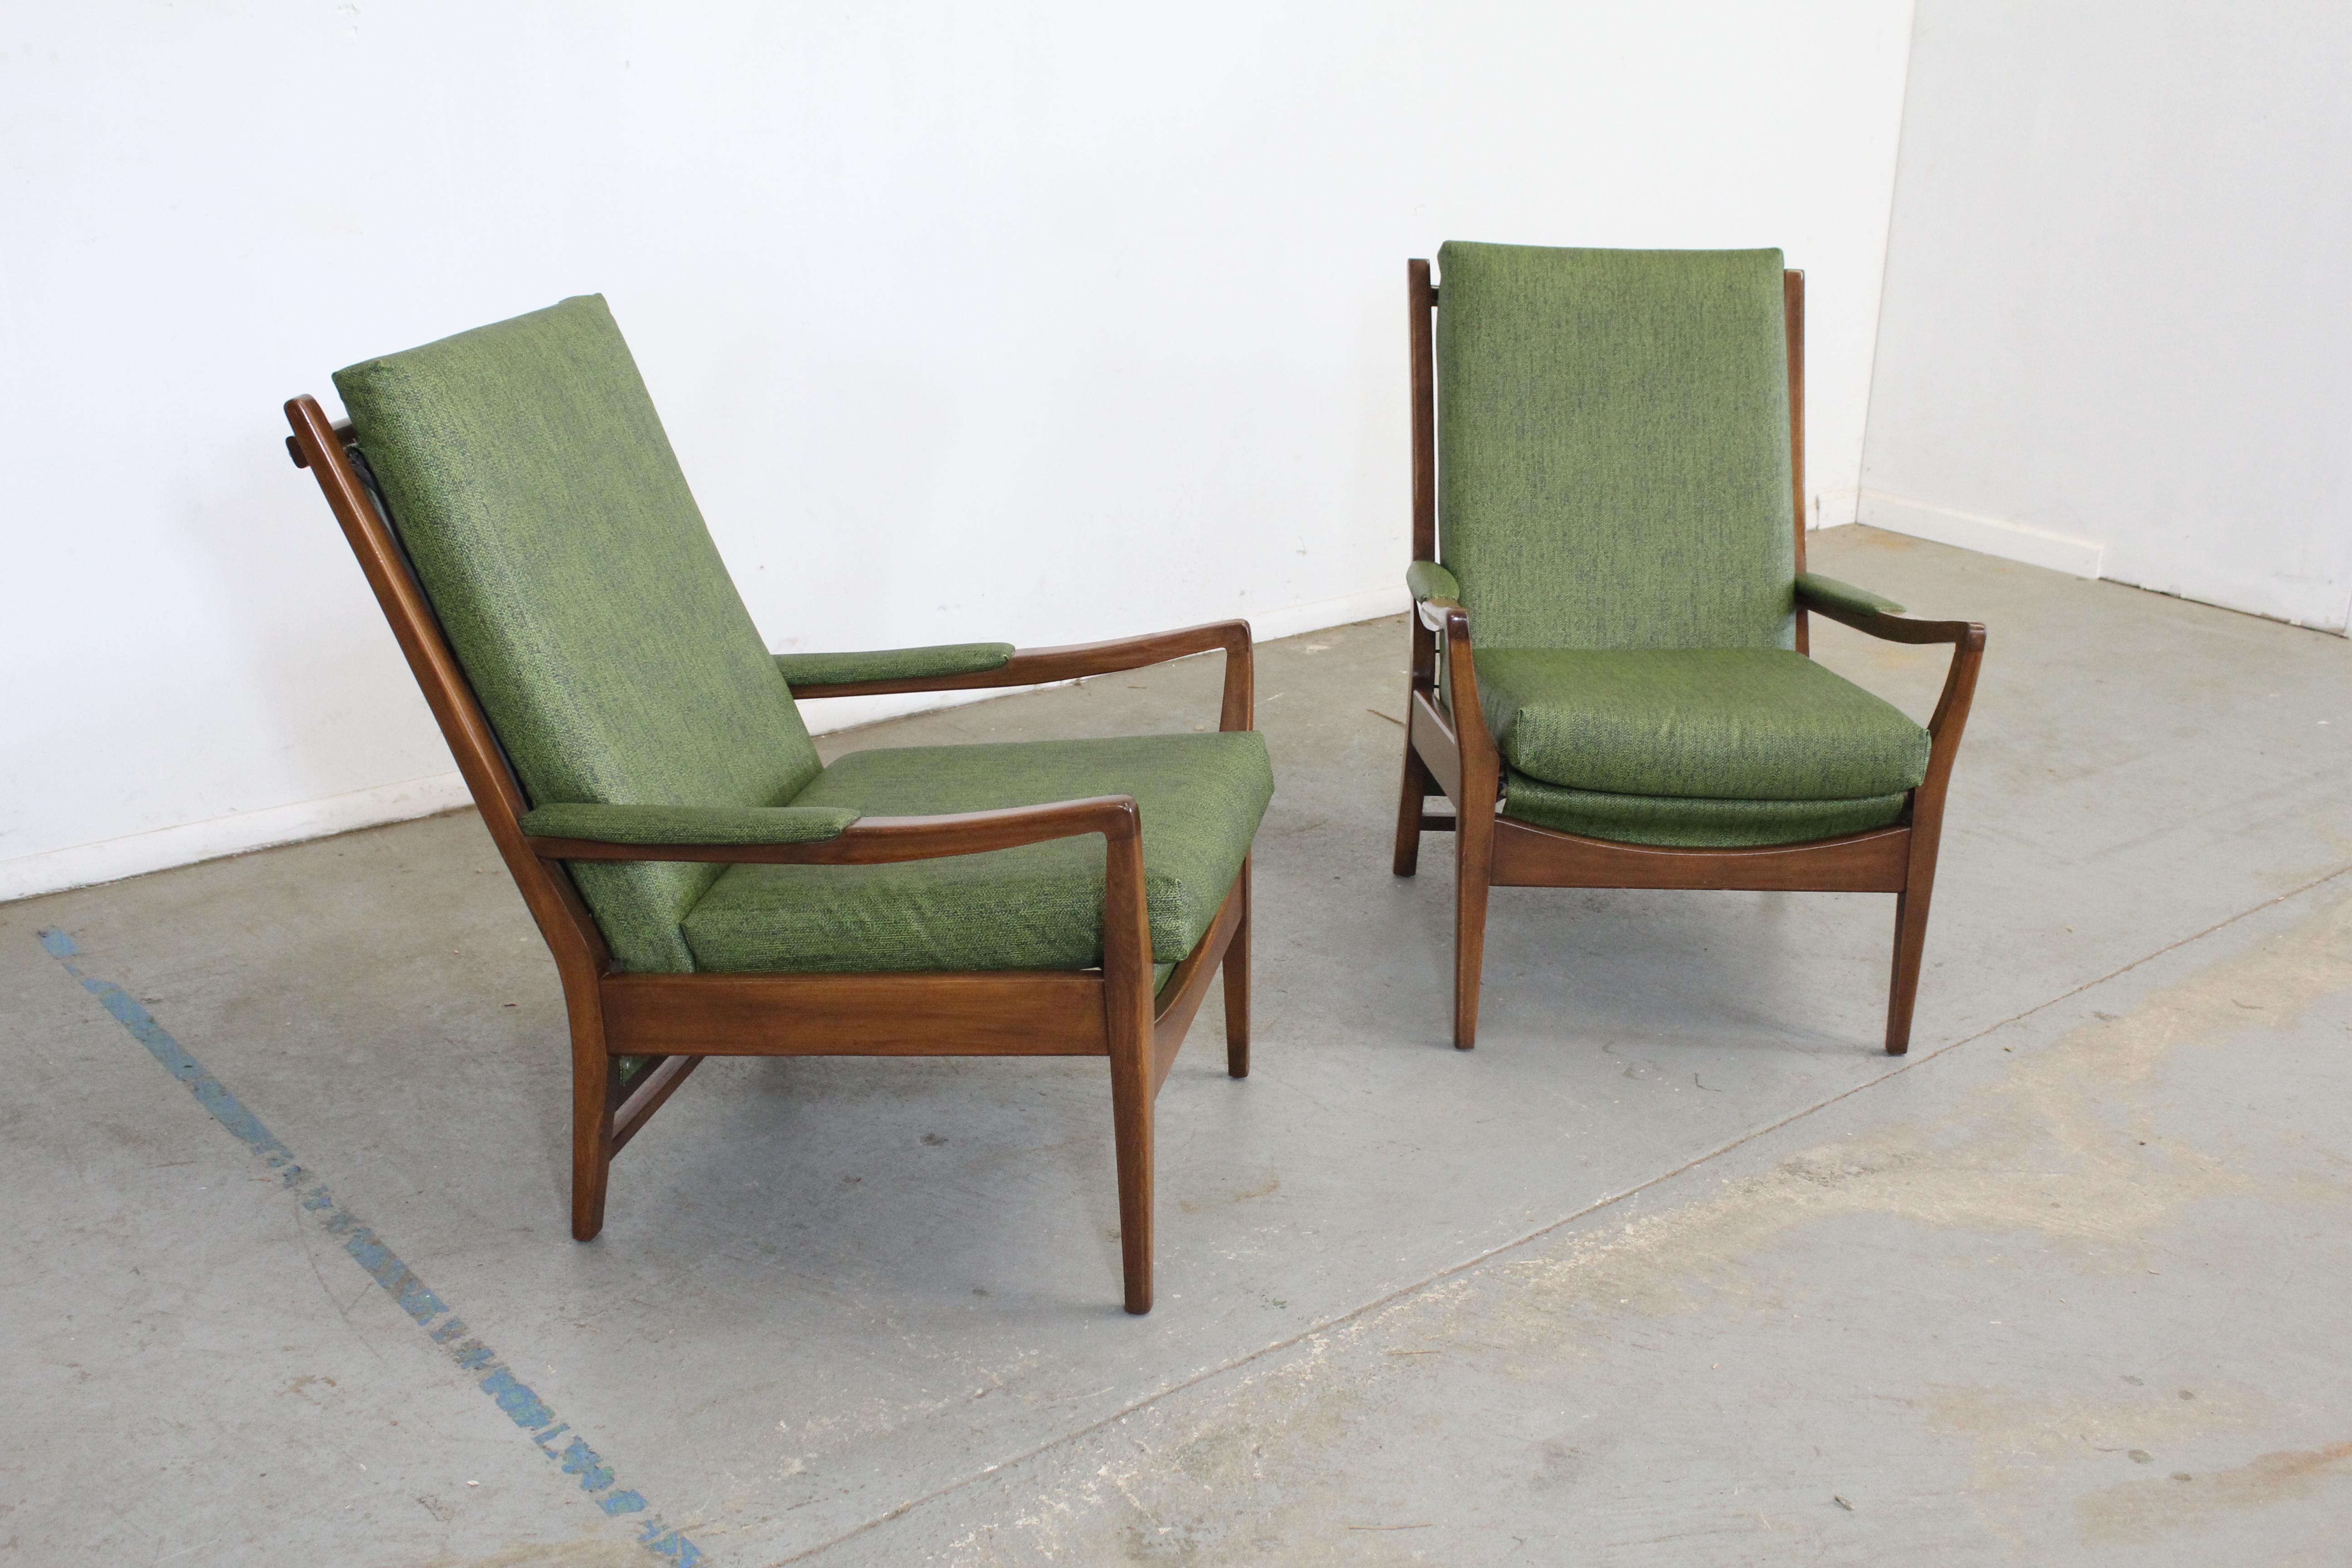 Pair of Mid-Century Modern walnut open arm lounge chairs

Offered is a beautifully pair of original lounge chairs by Cintique. They are all original and feature the original green vinyl in exceptional condition. Great condition with very mild age